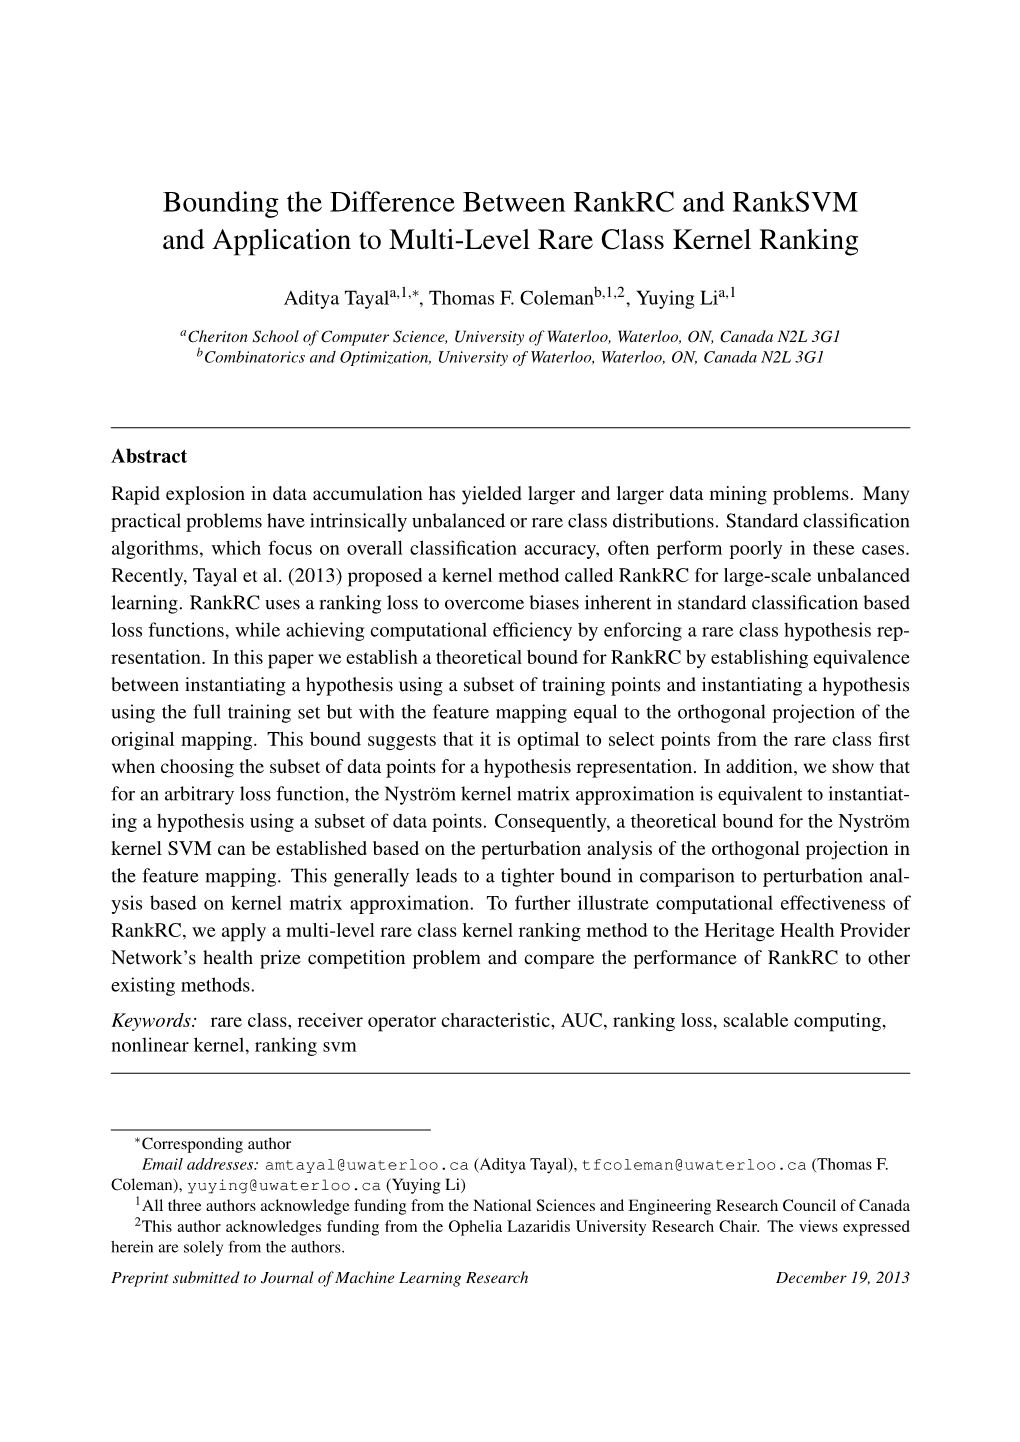 Bounding the Difference Between Rankrc and Ranksvm and Application to Multi-Level Rare Class Kernel Ranking